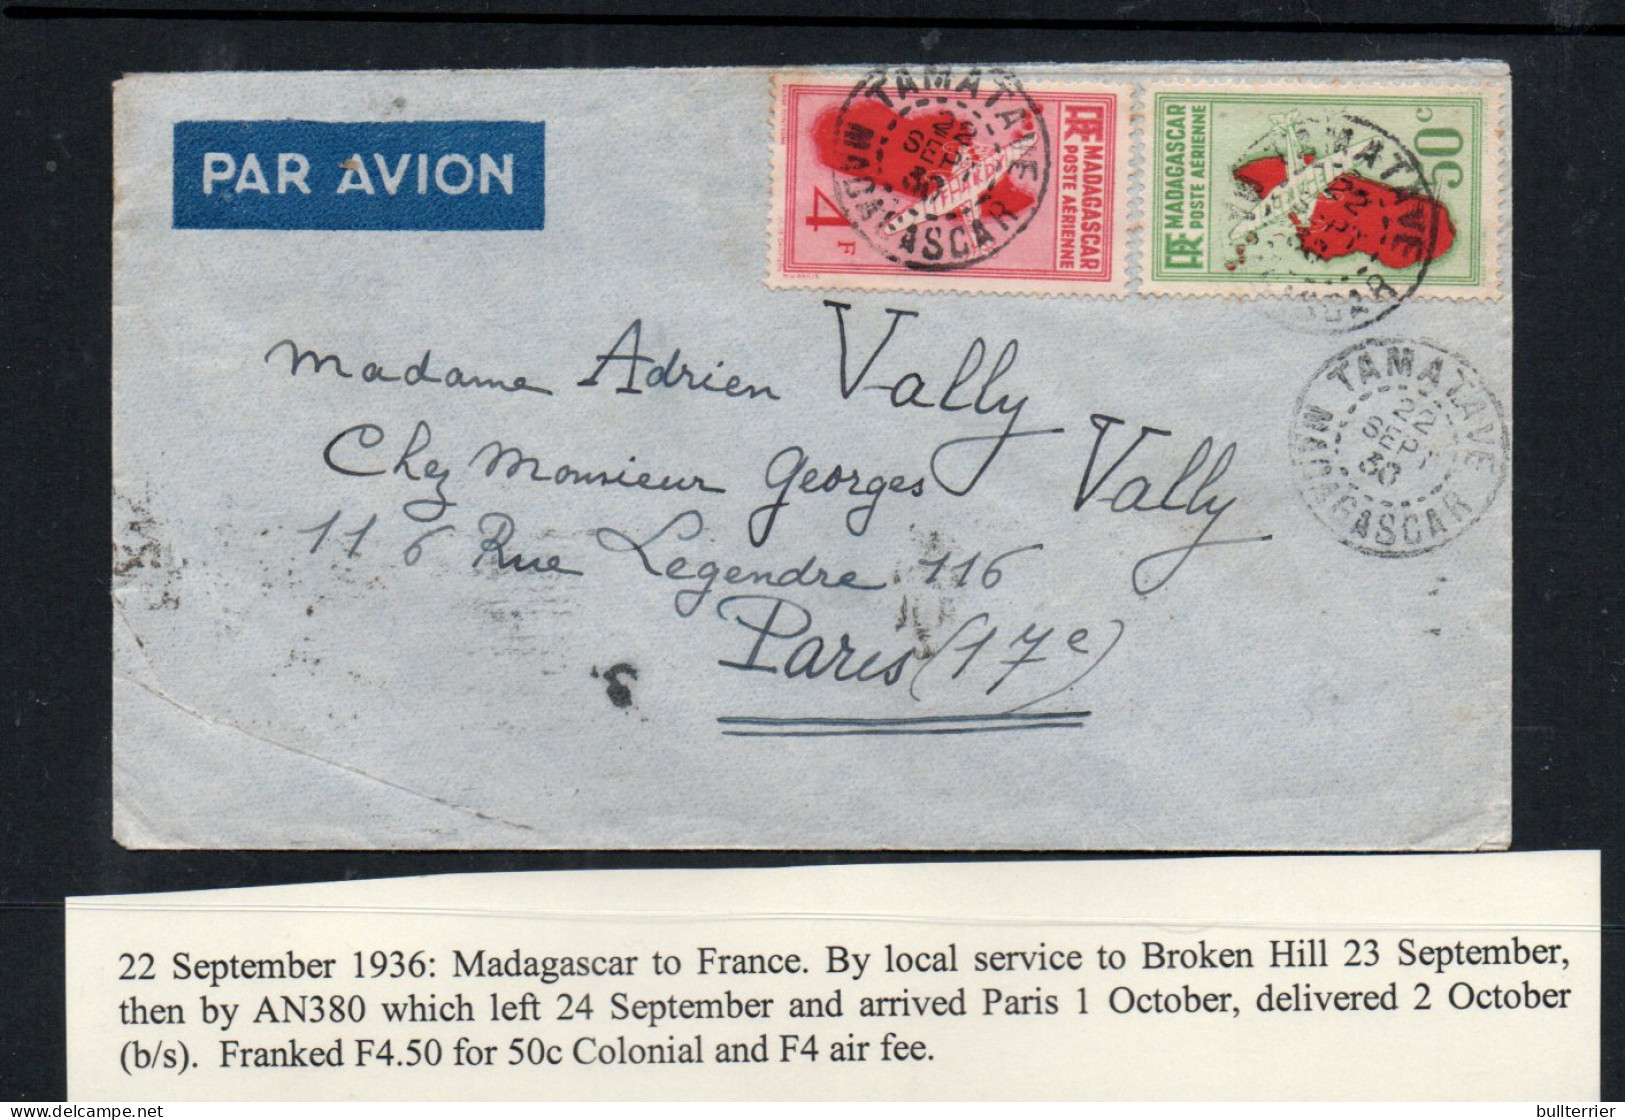 MADAGASCAR - 1936-  AN380 AIRMAIL COVER TO FRANCE WITH BACKSTAMPS - Airmail